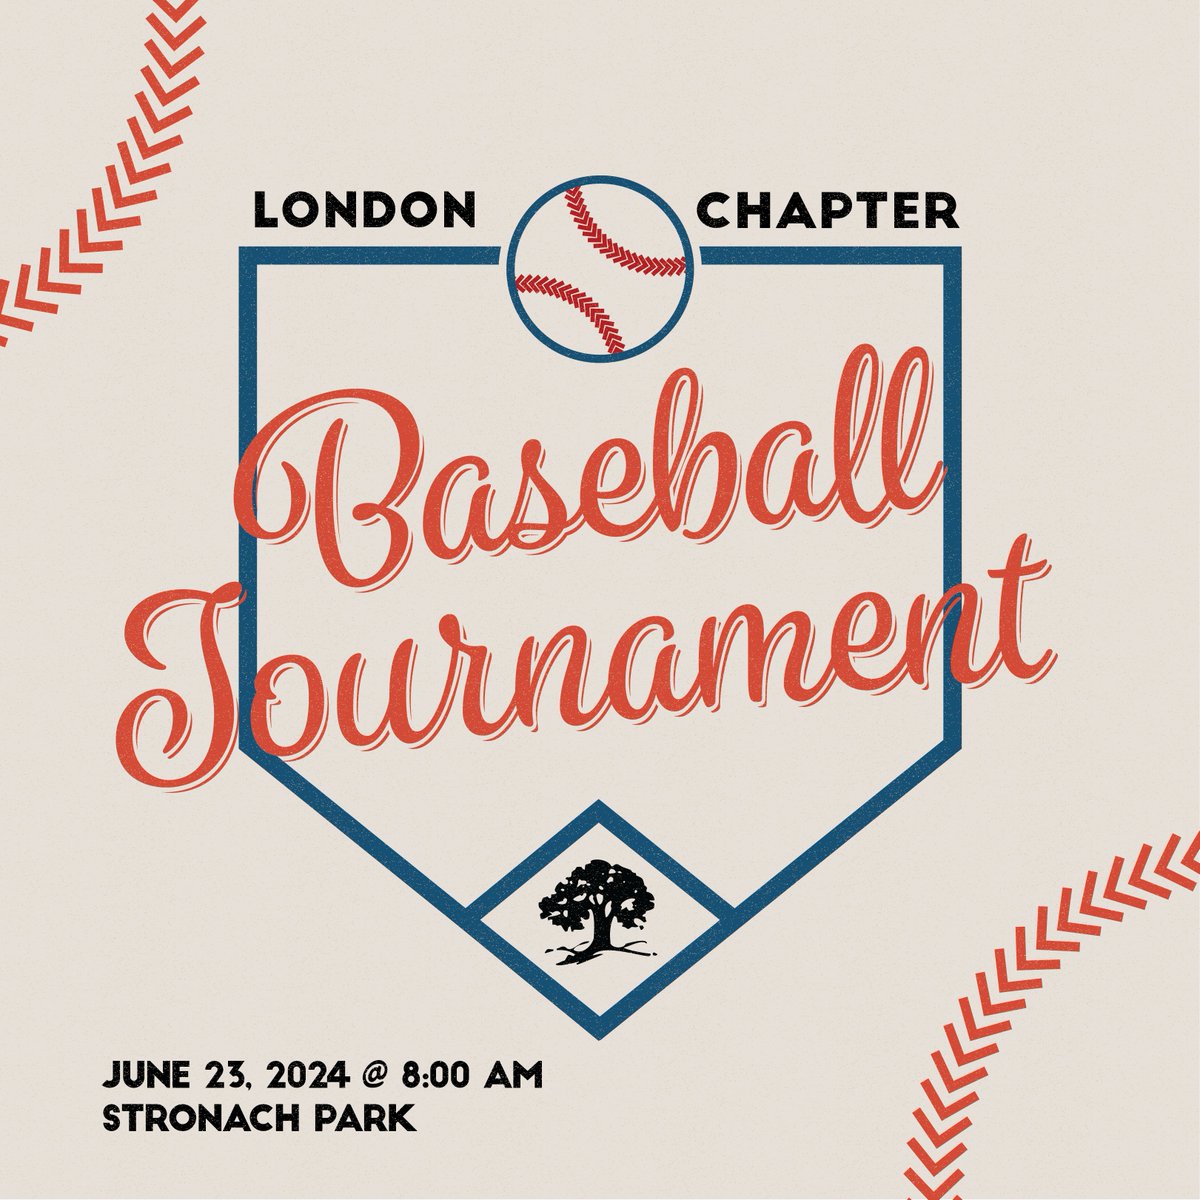 LONDON CHAPTER BASEBALL TOURNAMENT 🗓️⚾ Lace up your cleats and grab a bat, it's time to play ball alongside fellow London Chapter members! 🗓️ Sunday, June 23, 2024 📍 Stronach Park | London, ON 👉 Save the date: horttrades.com/london-chapter… #LandscapeOntario